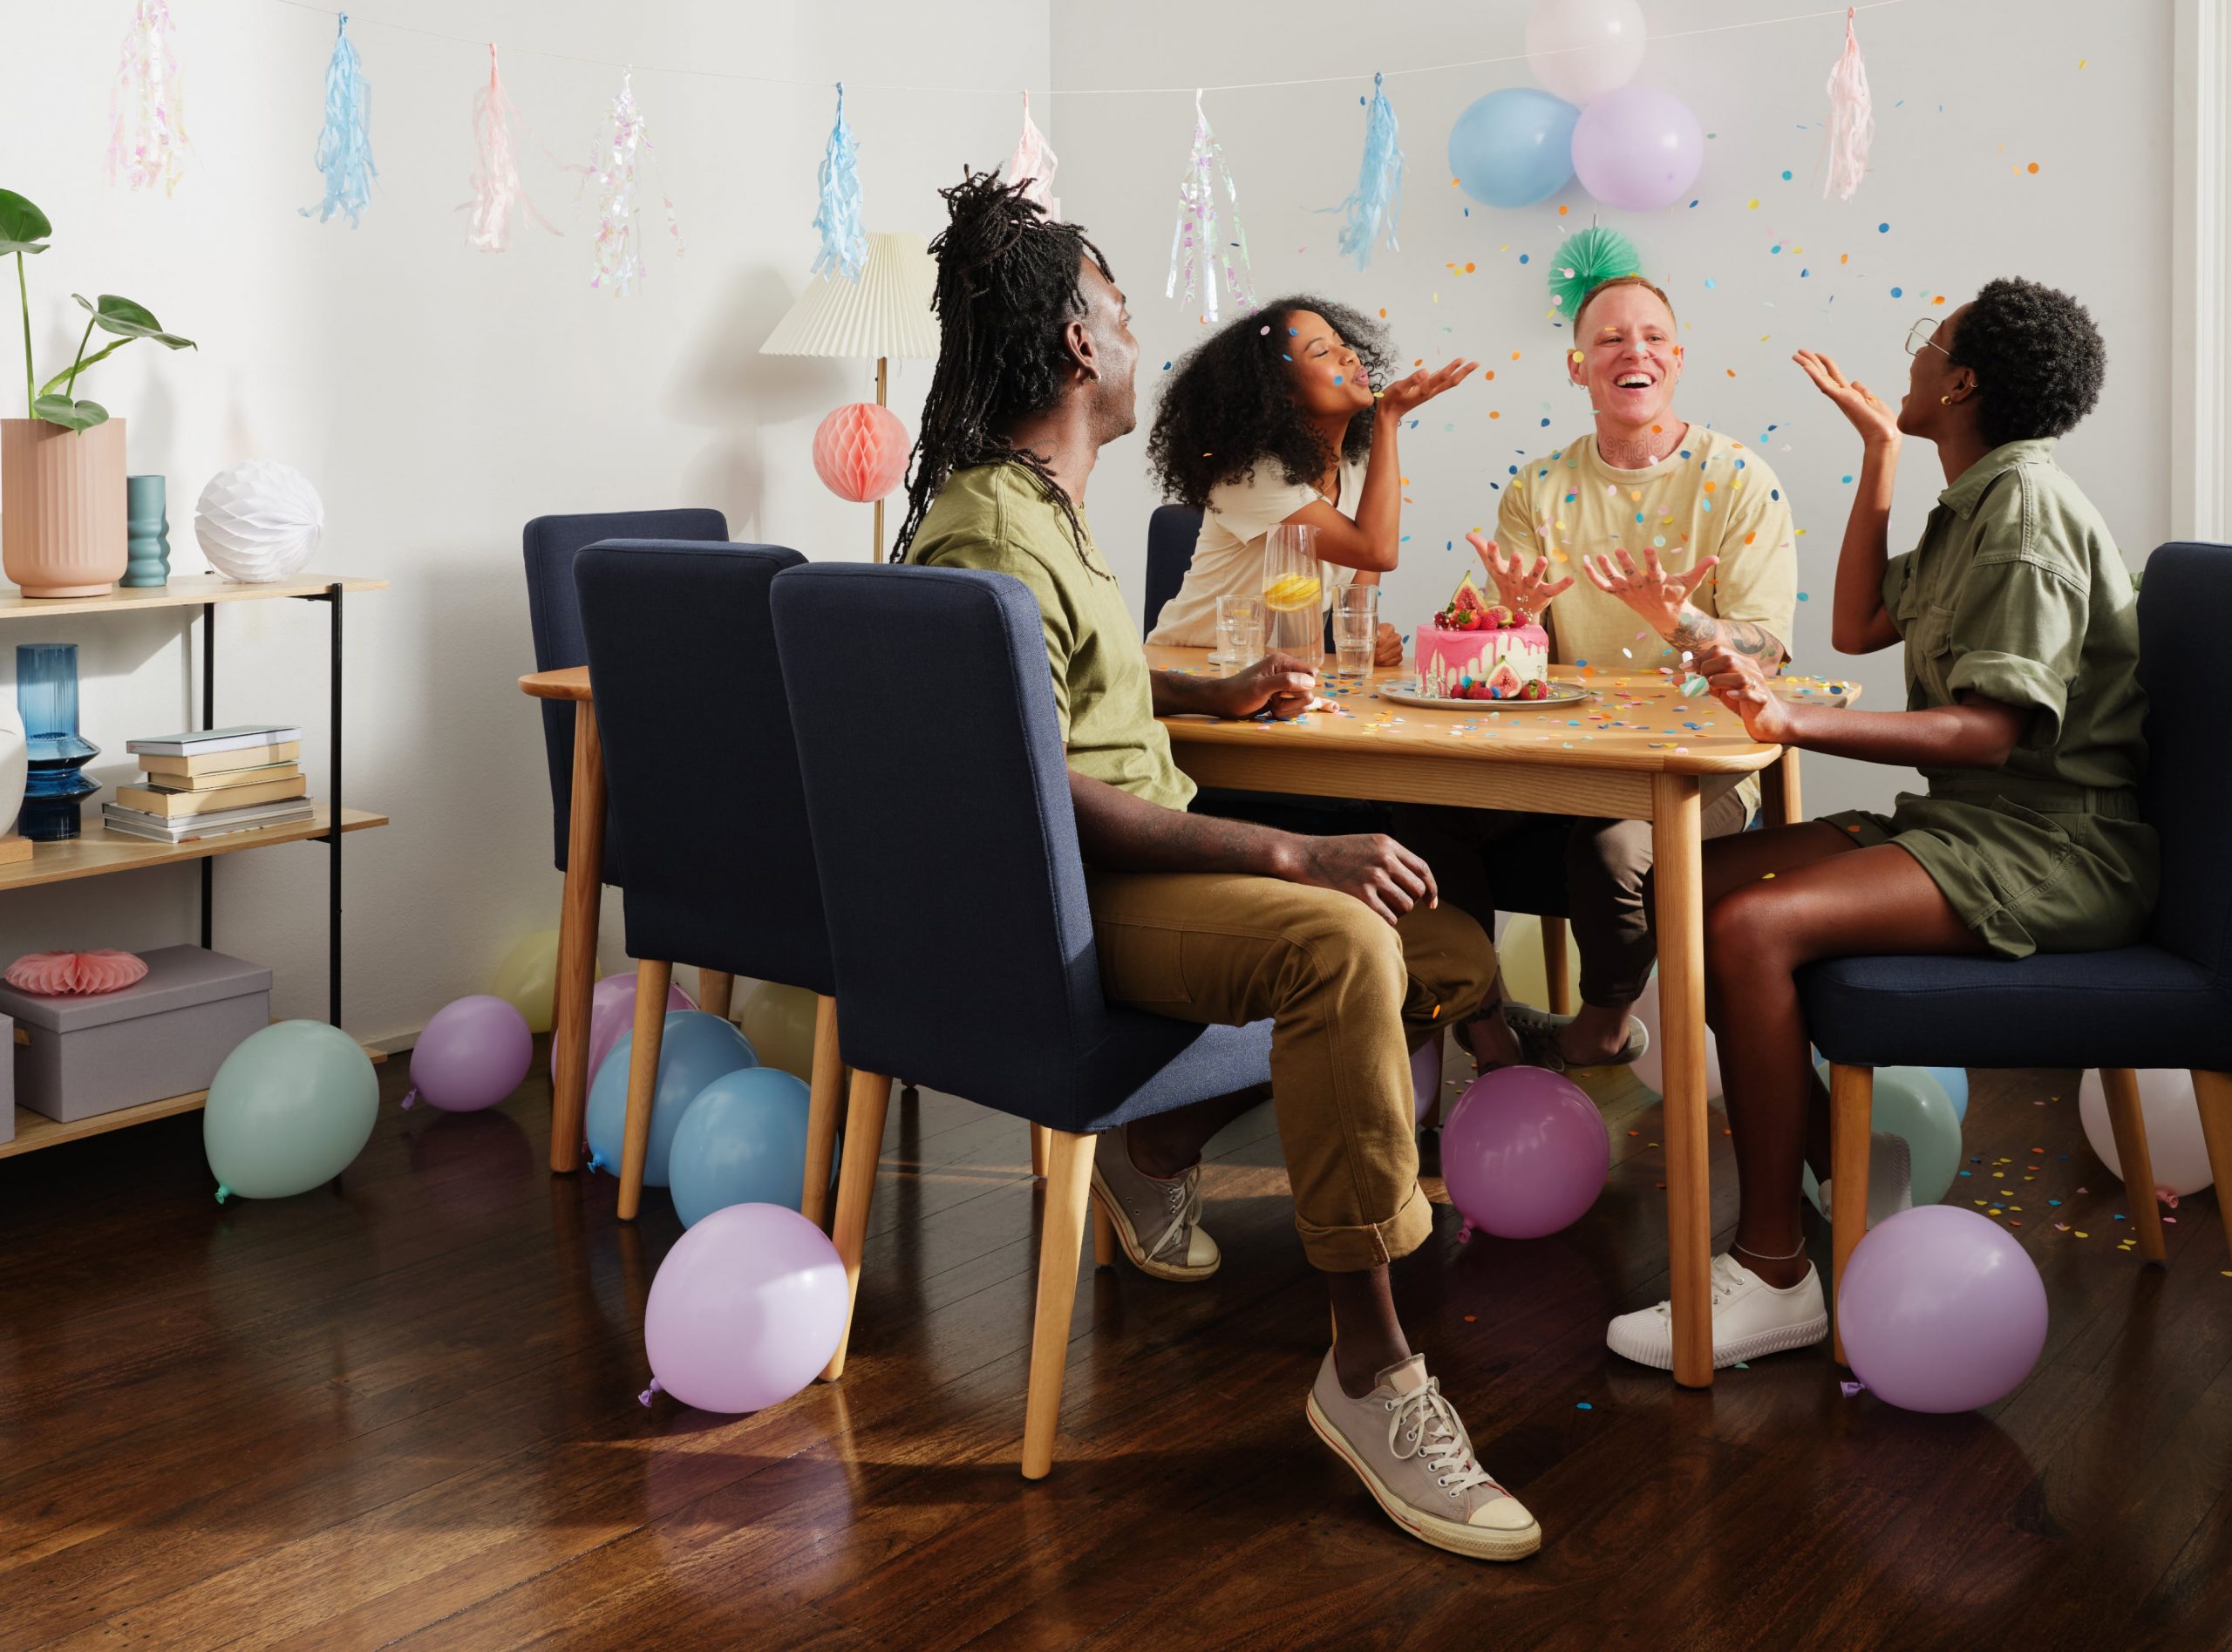 Four friends sit at a timber dining table with dark blue upholstered chairs, balloons and party streamers